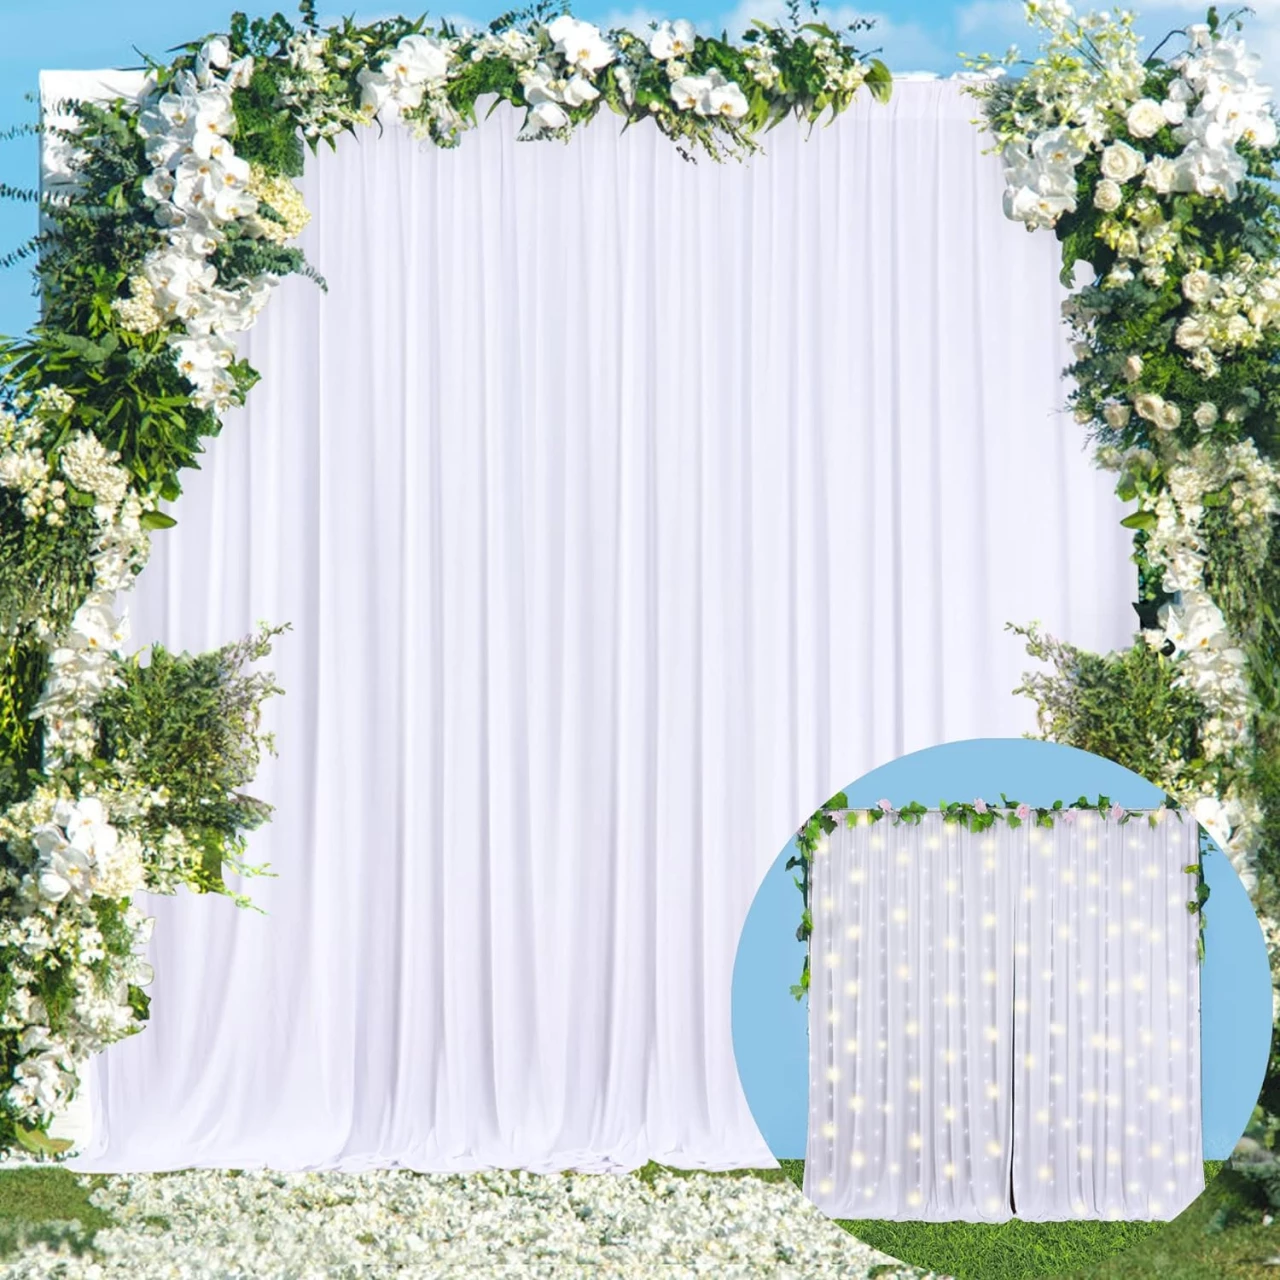 10x10 White Backdrop Curtain for Parties Wedding Wrinkle Free White Photo Curtains Backdrop Drapes Fabric Decoration for Baby Shower 5ft x 10ft,2 Panels